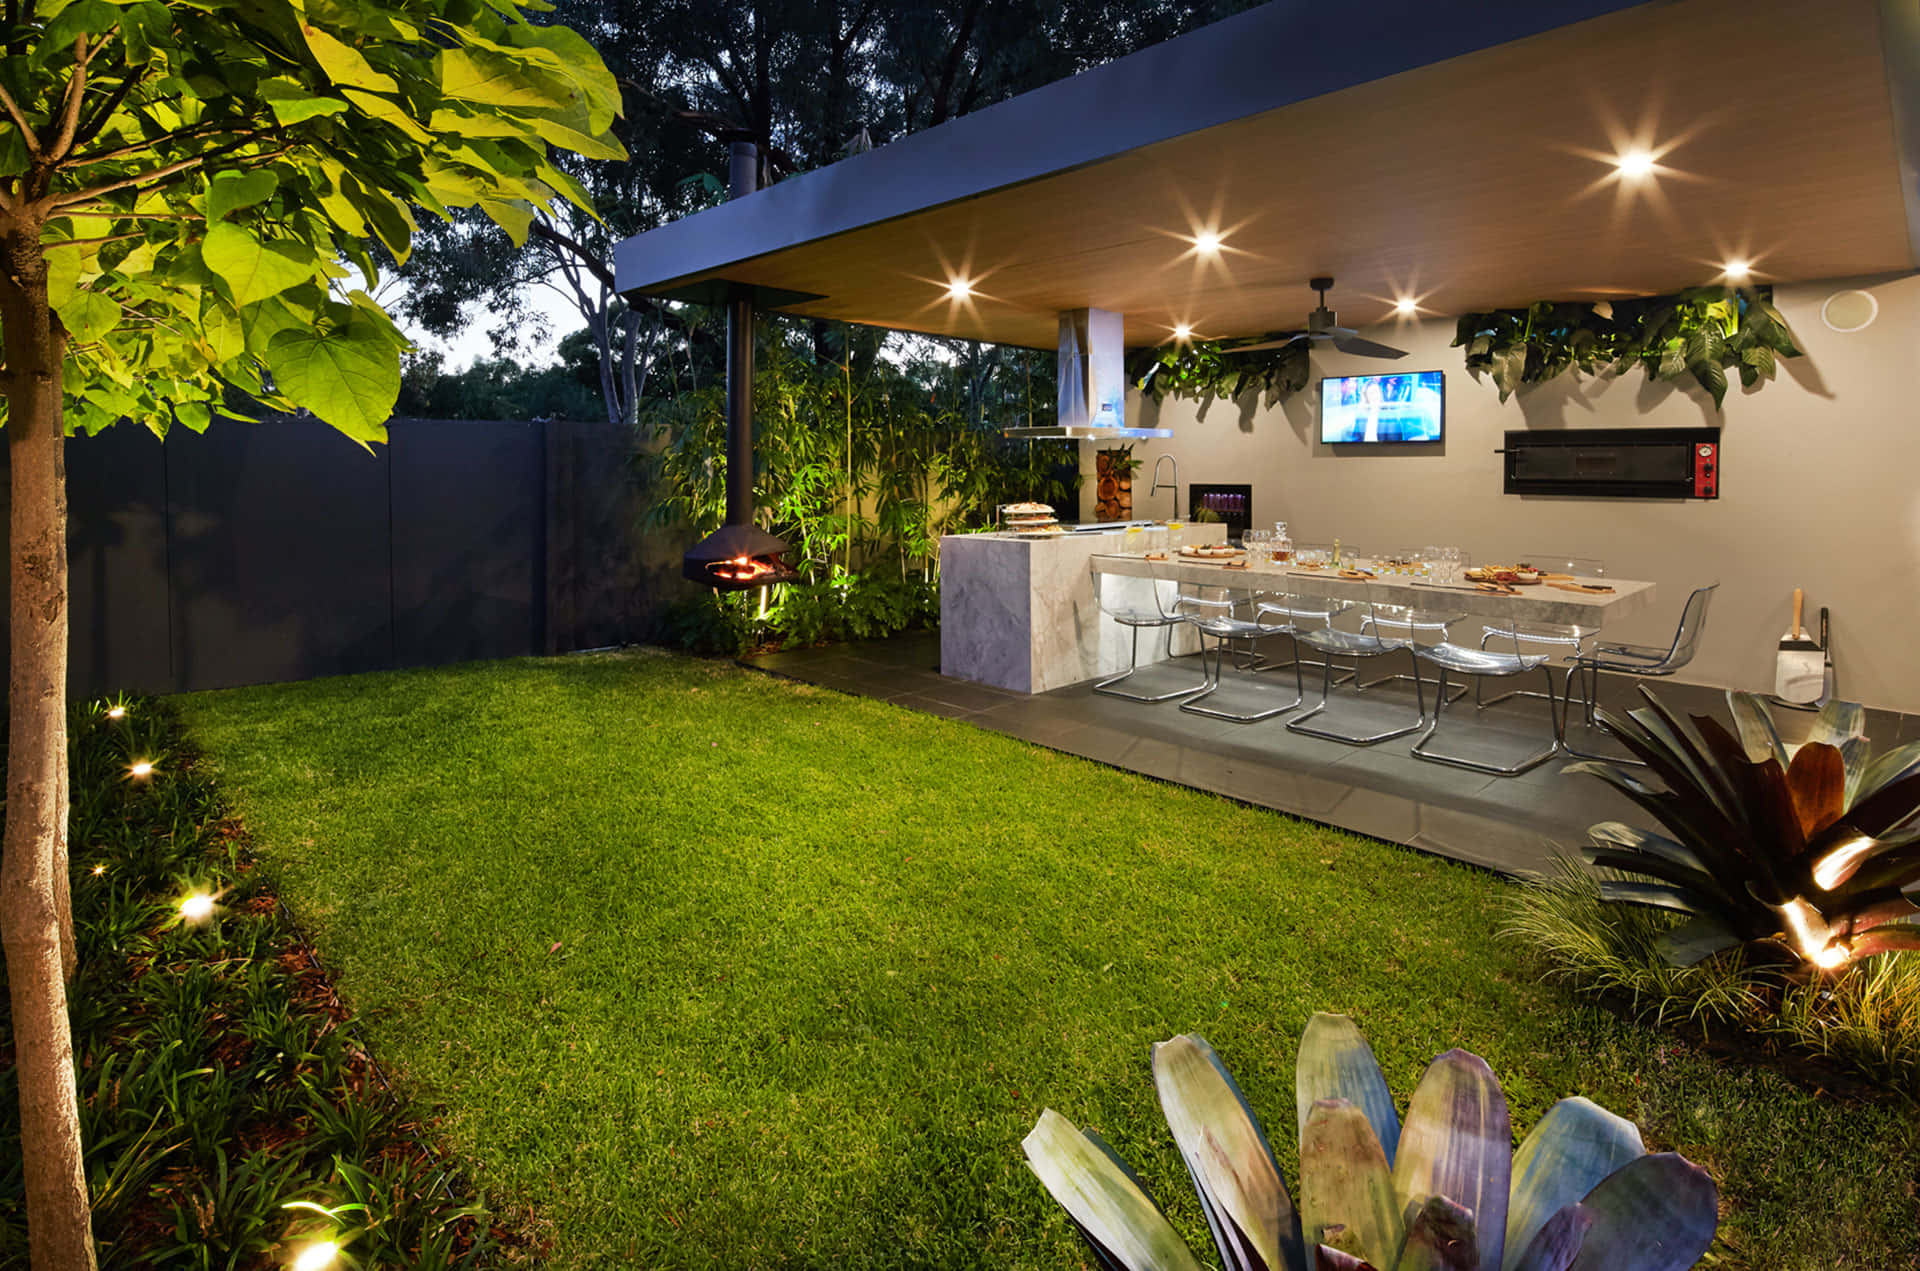 A Backyard With A Tv And A Grill